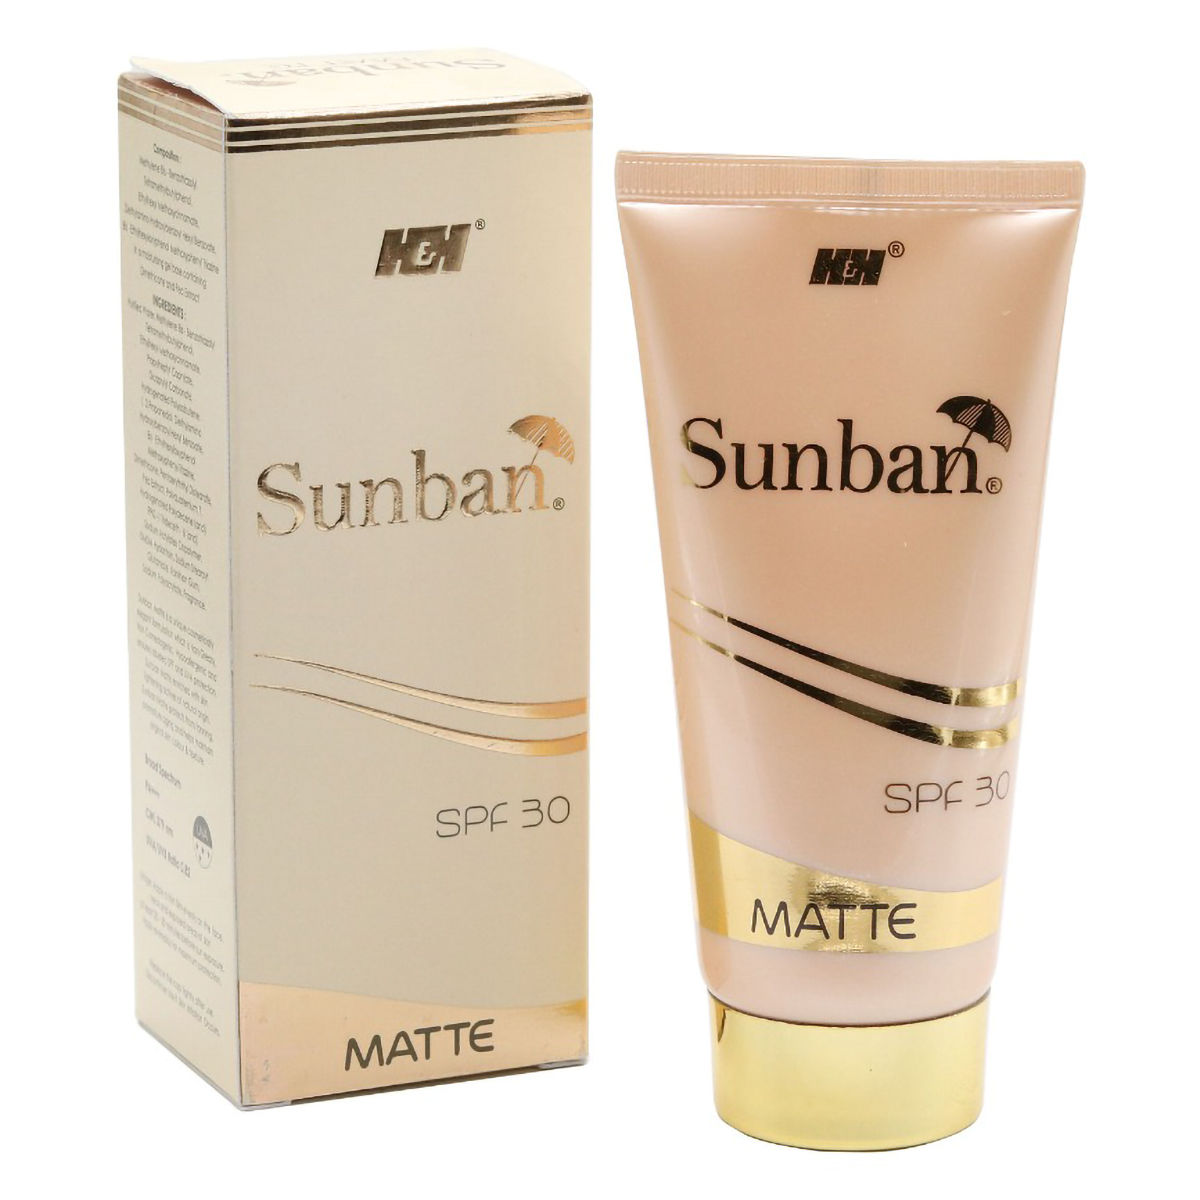 Sunban Matte Gel SPF 30, 75 gm Price, Uses, Side Effects, Composition -  Apollo Pharmacy